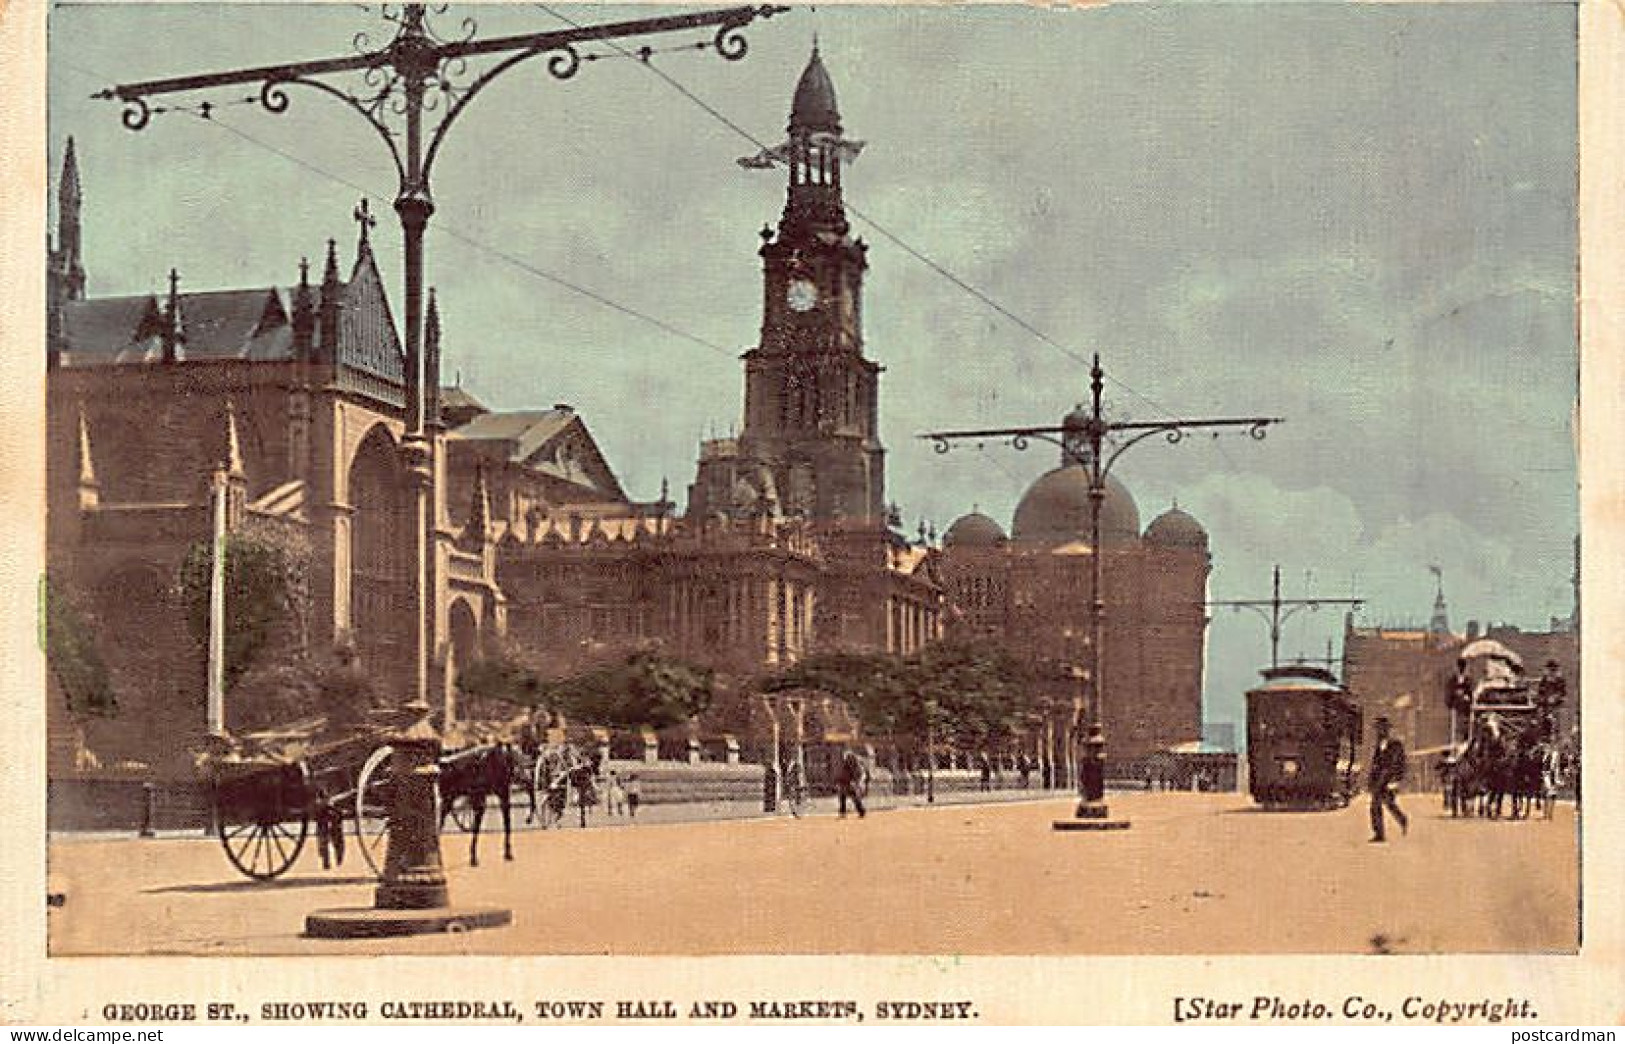 Australia - SYDNEY (NSW) George St., Showing Cathedral, Town-Hall And Markets - Publ. Star Photo Co.  - Sydney